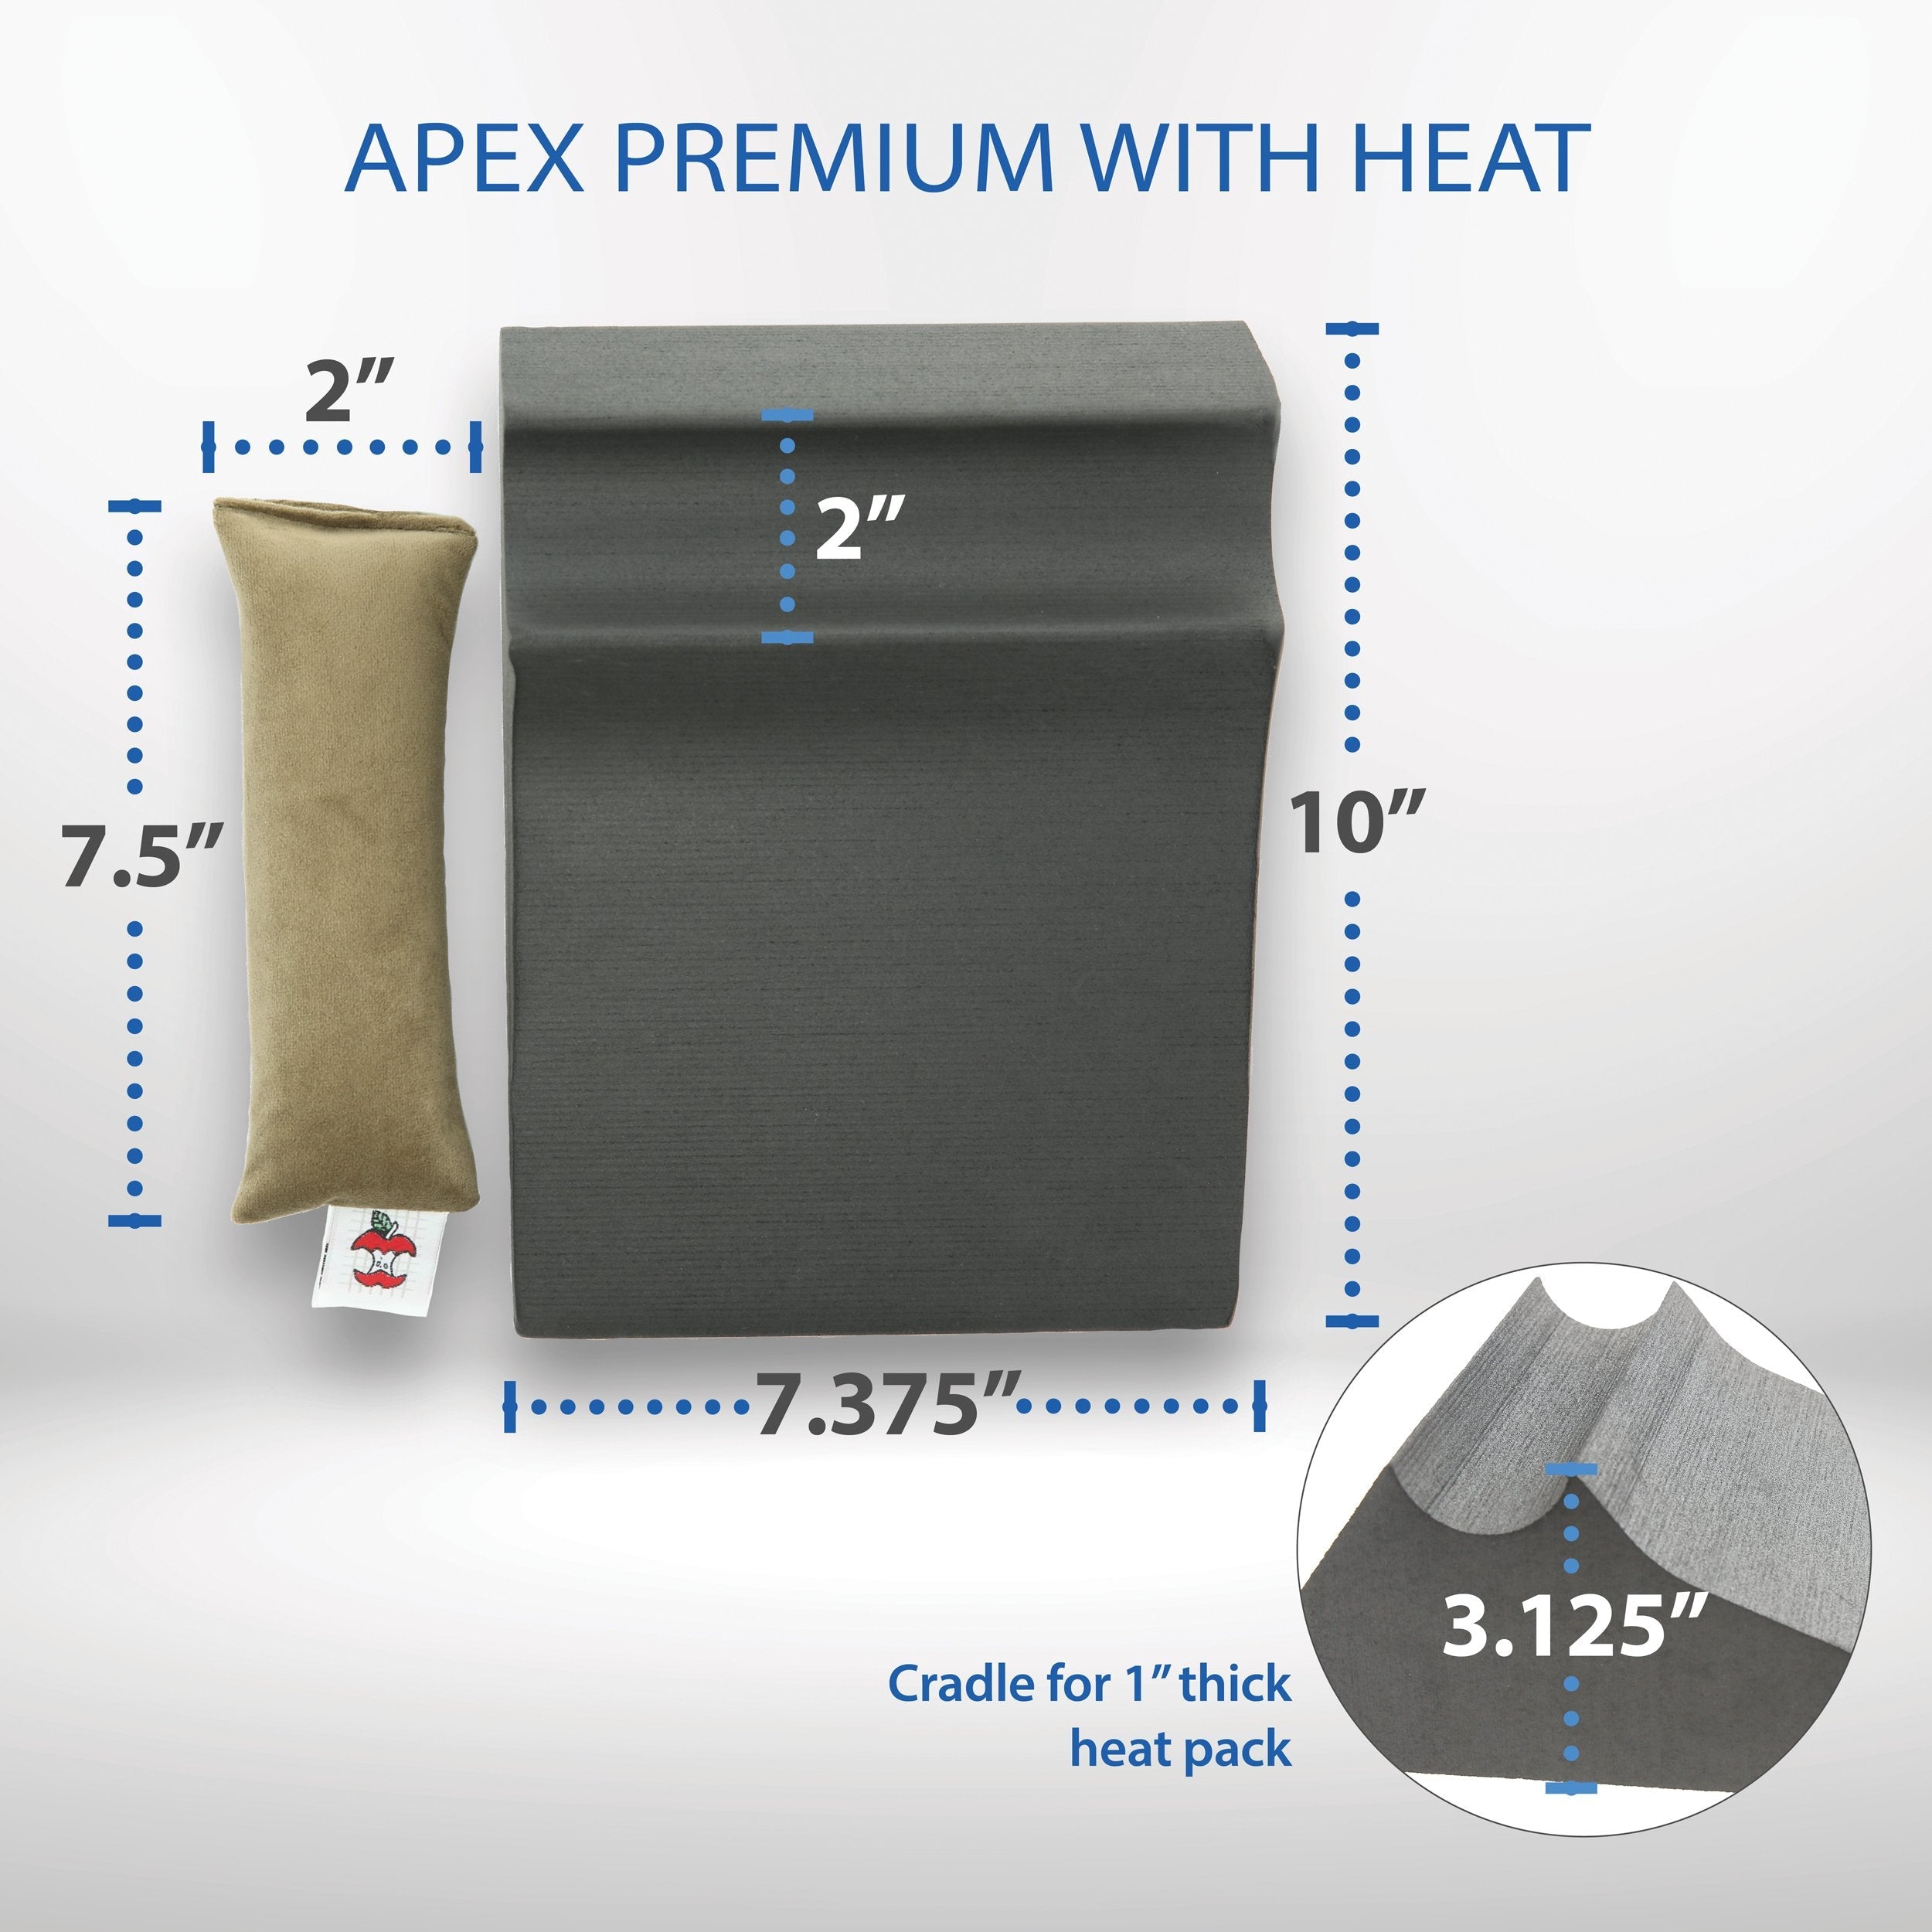 Apex Cervical Orthosis Premium with Heat - physio supplies canada